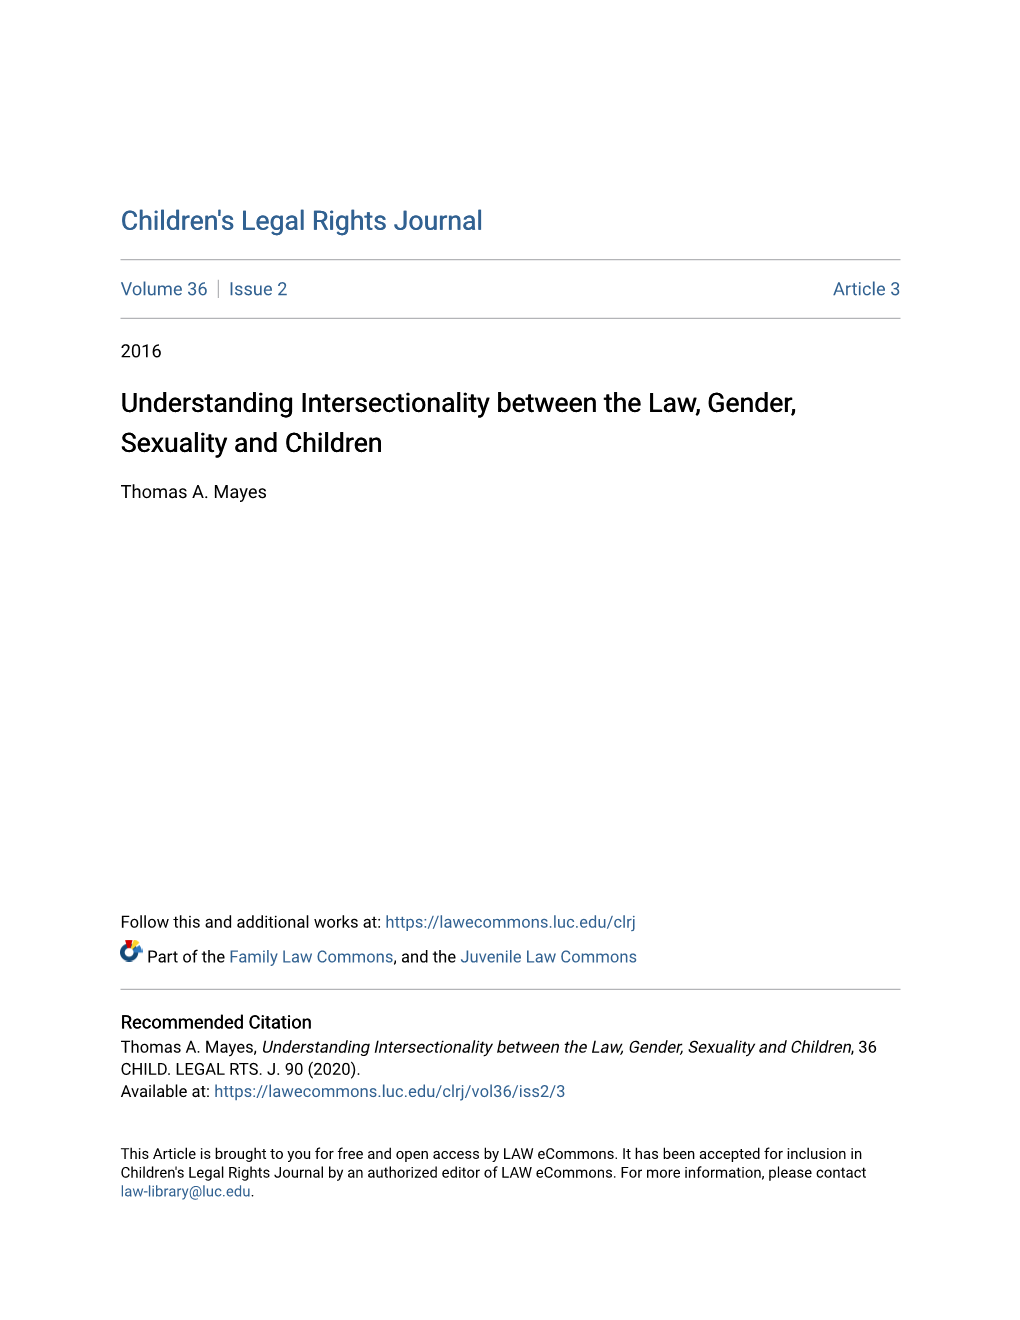 Understanding Intersectionality Between the Law, Gender, Sexuality and Children